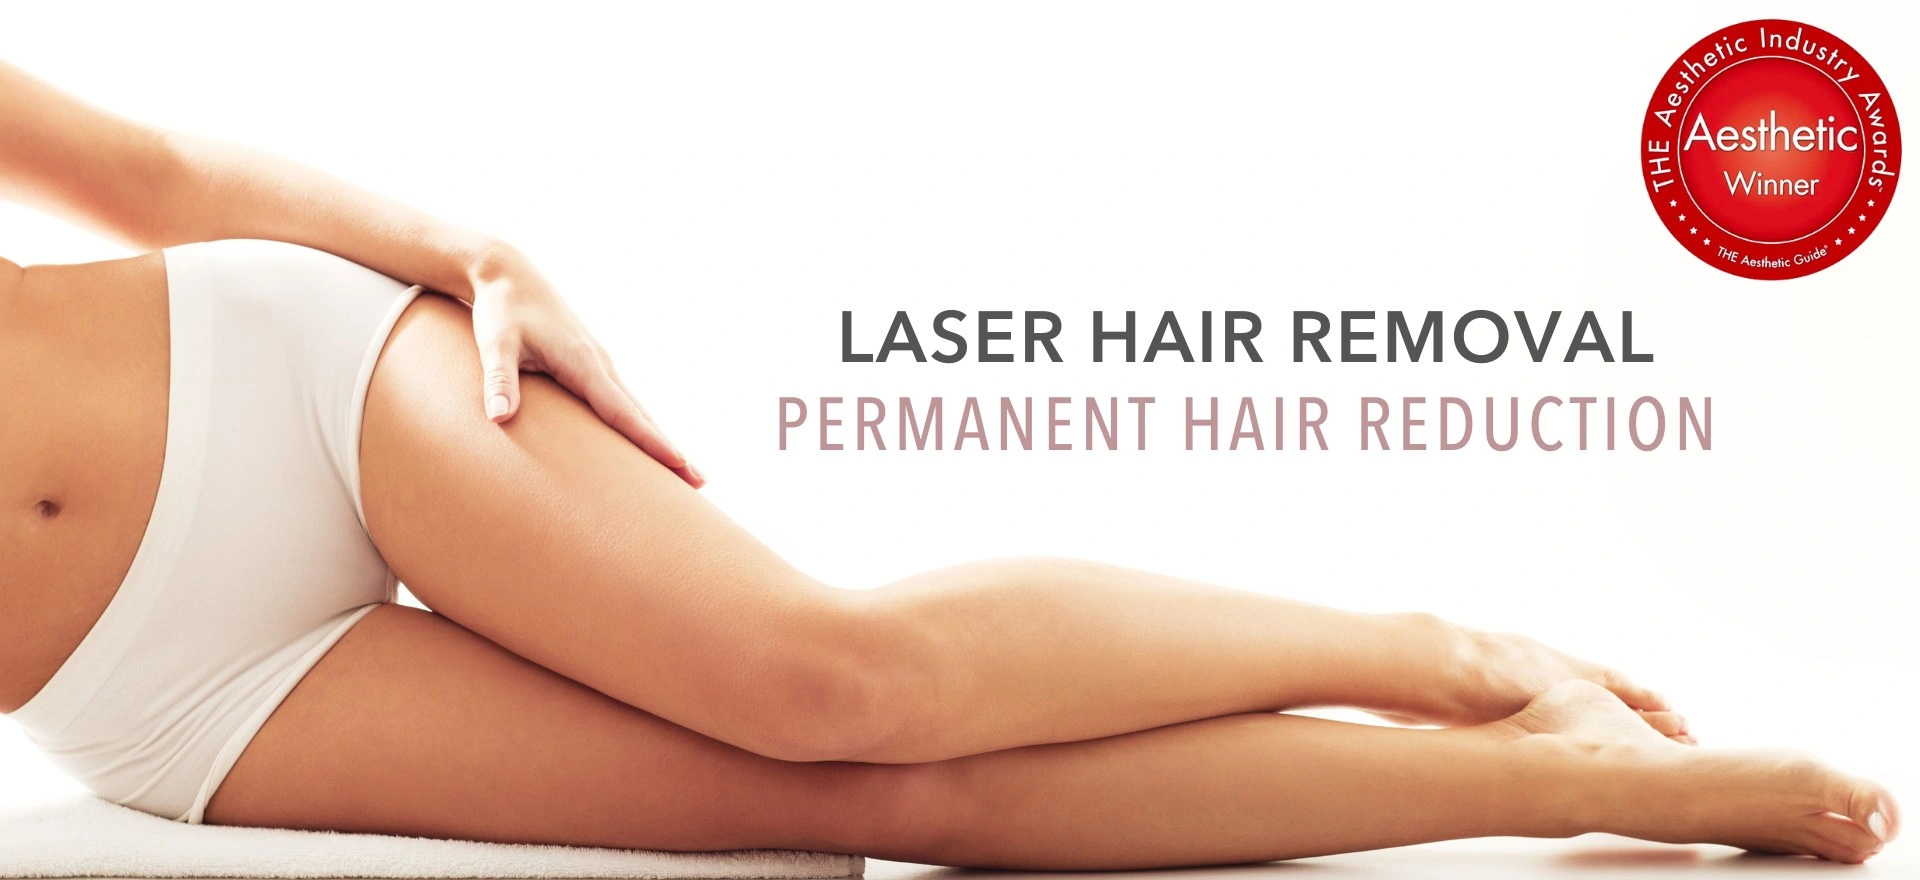 How to Prepare for Laser Hair Removal - Maya Laser Clinic